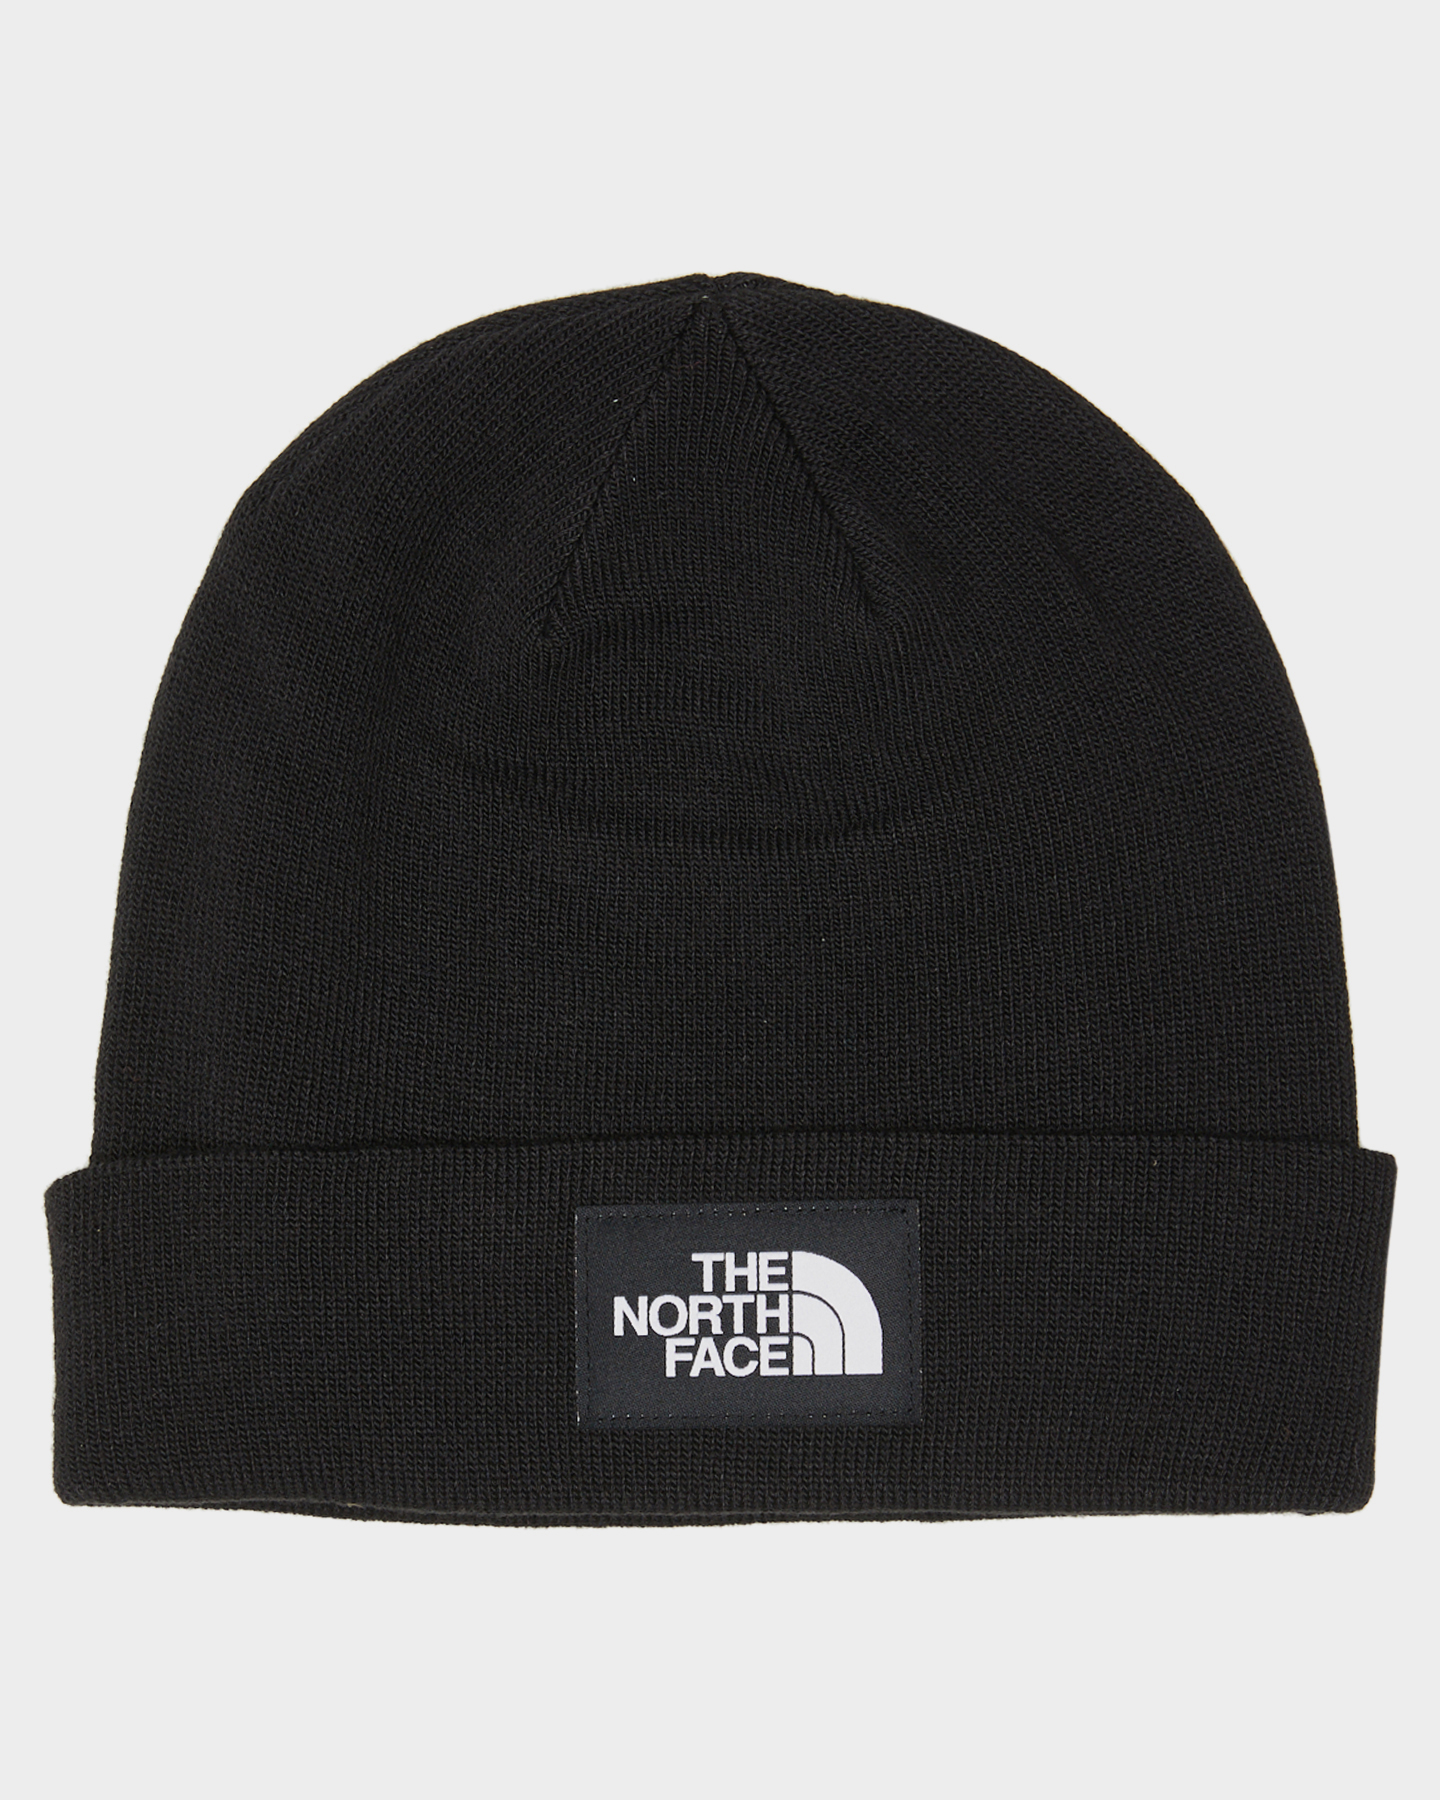 The North Face Dock Worker Recycled Beanie - Tnf Black | SurfStitch